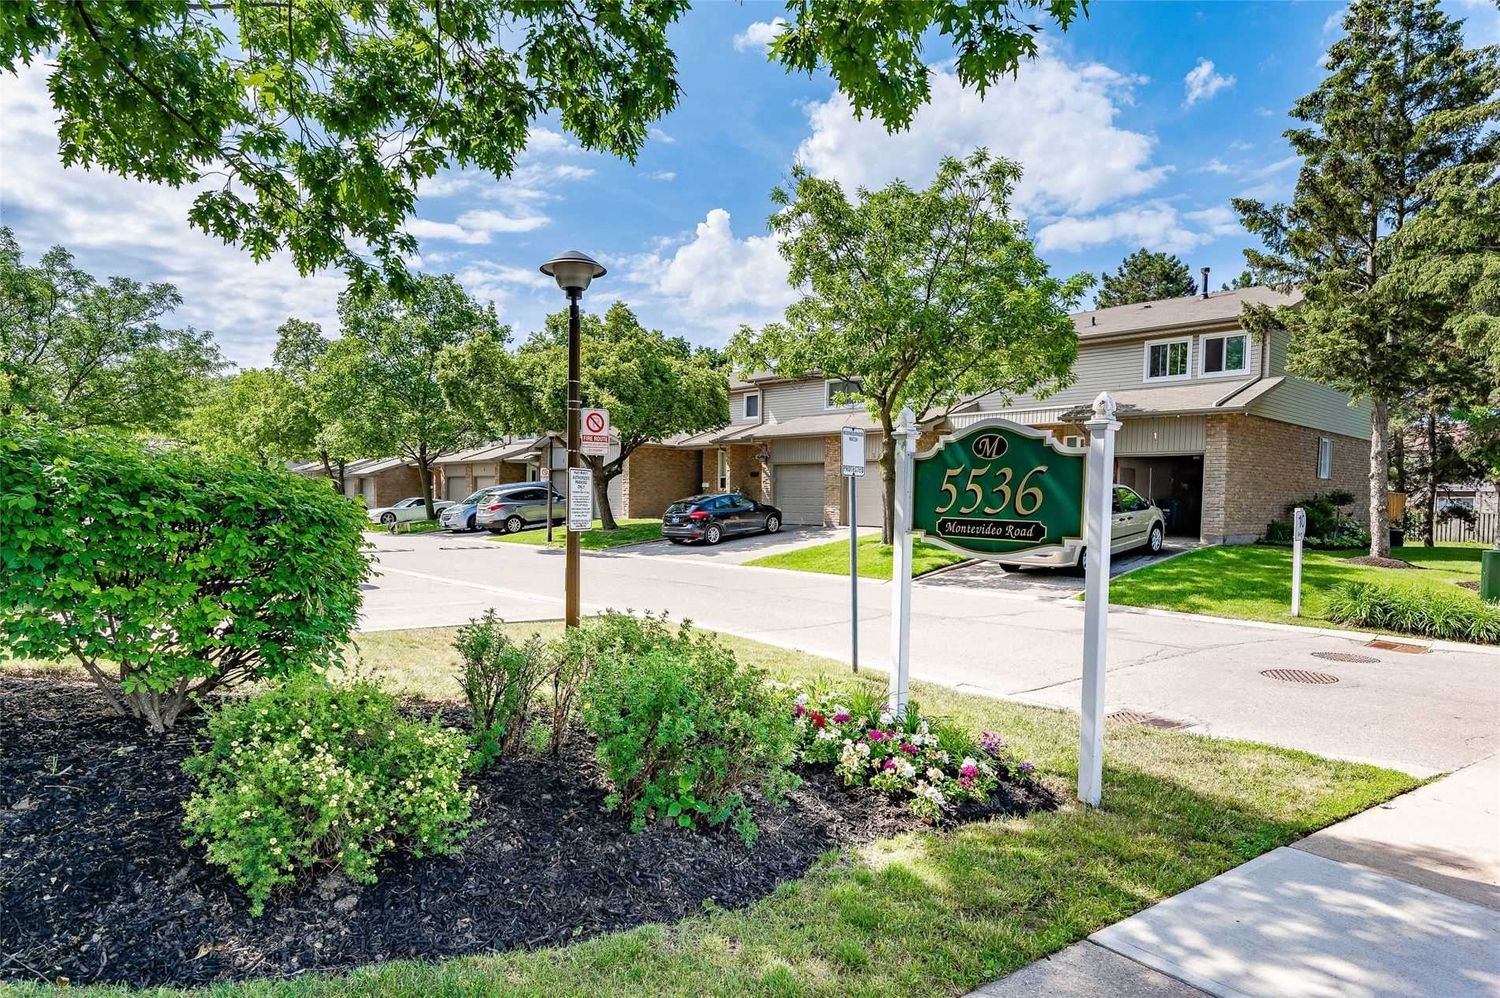 5536 Montevideo Road. 5536 Montevideo Townhomes is located in  Mississauga, Toronto - image #1 of 2